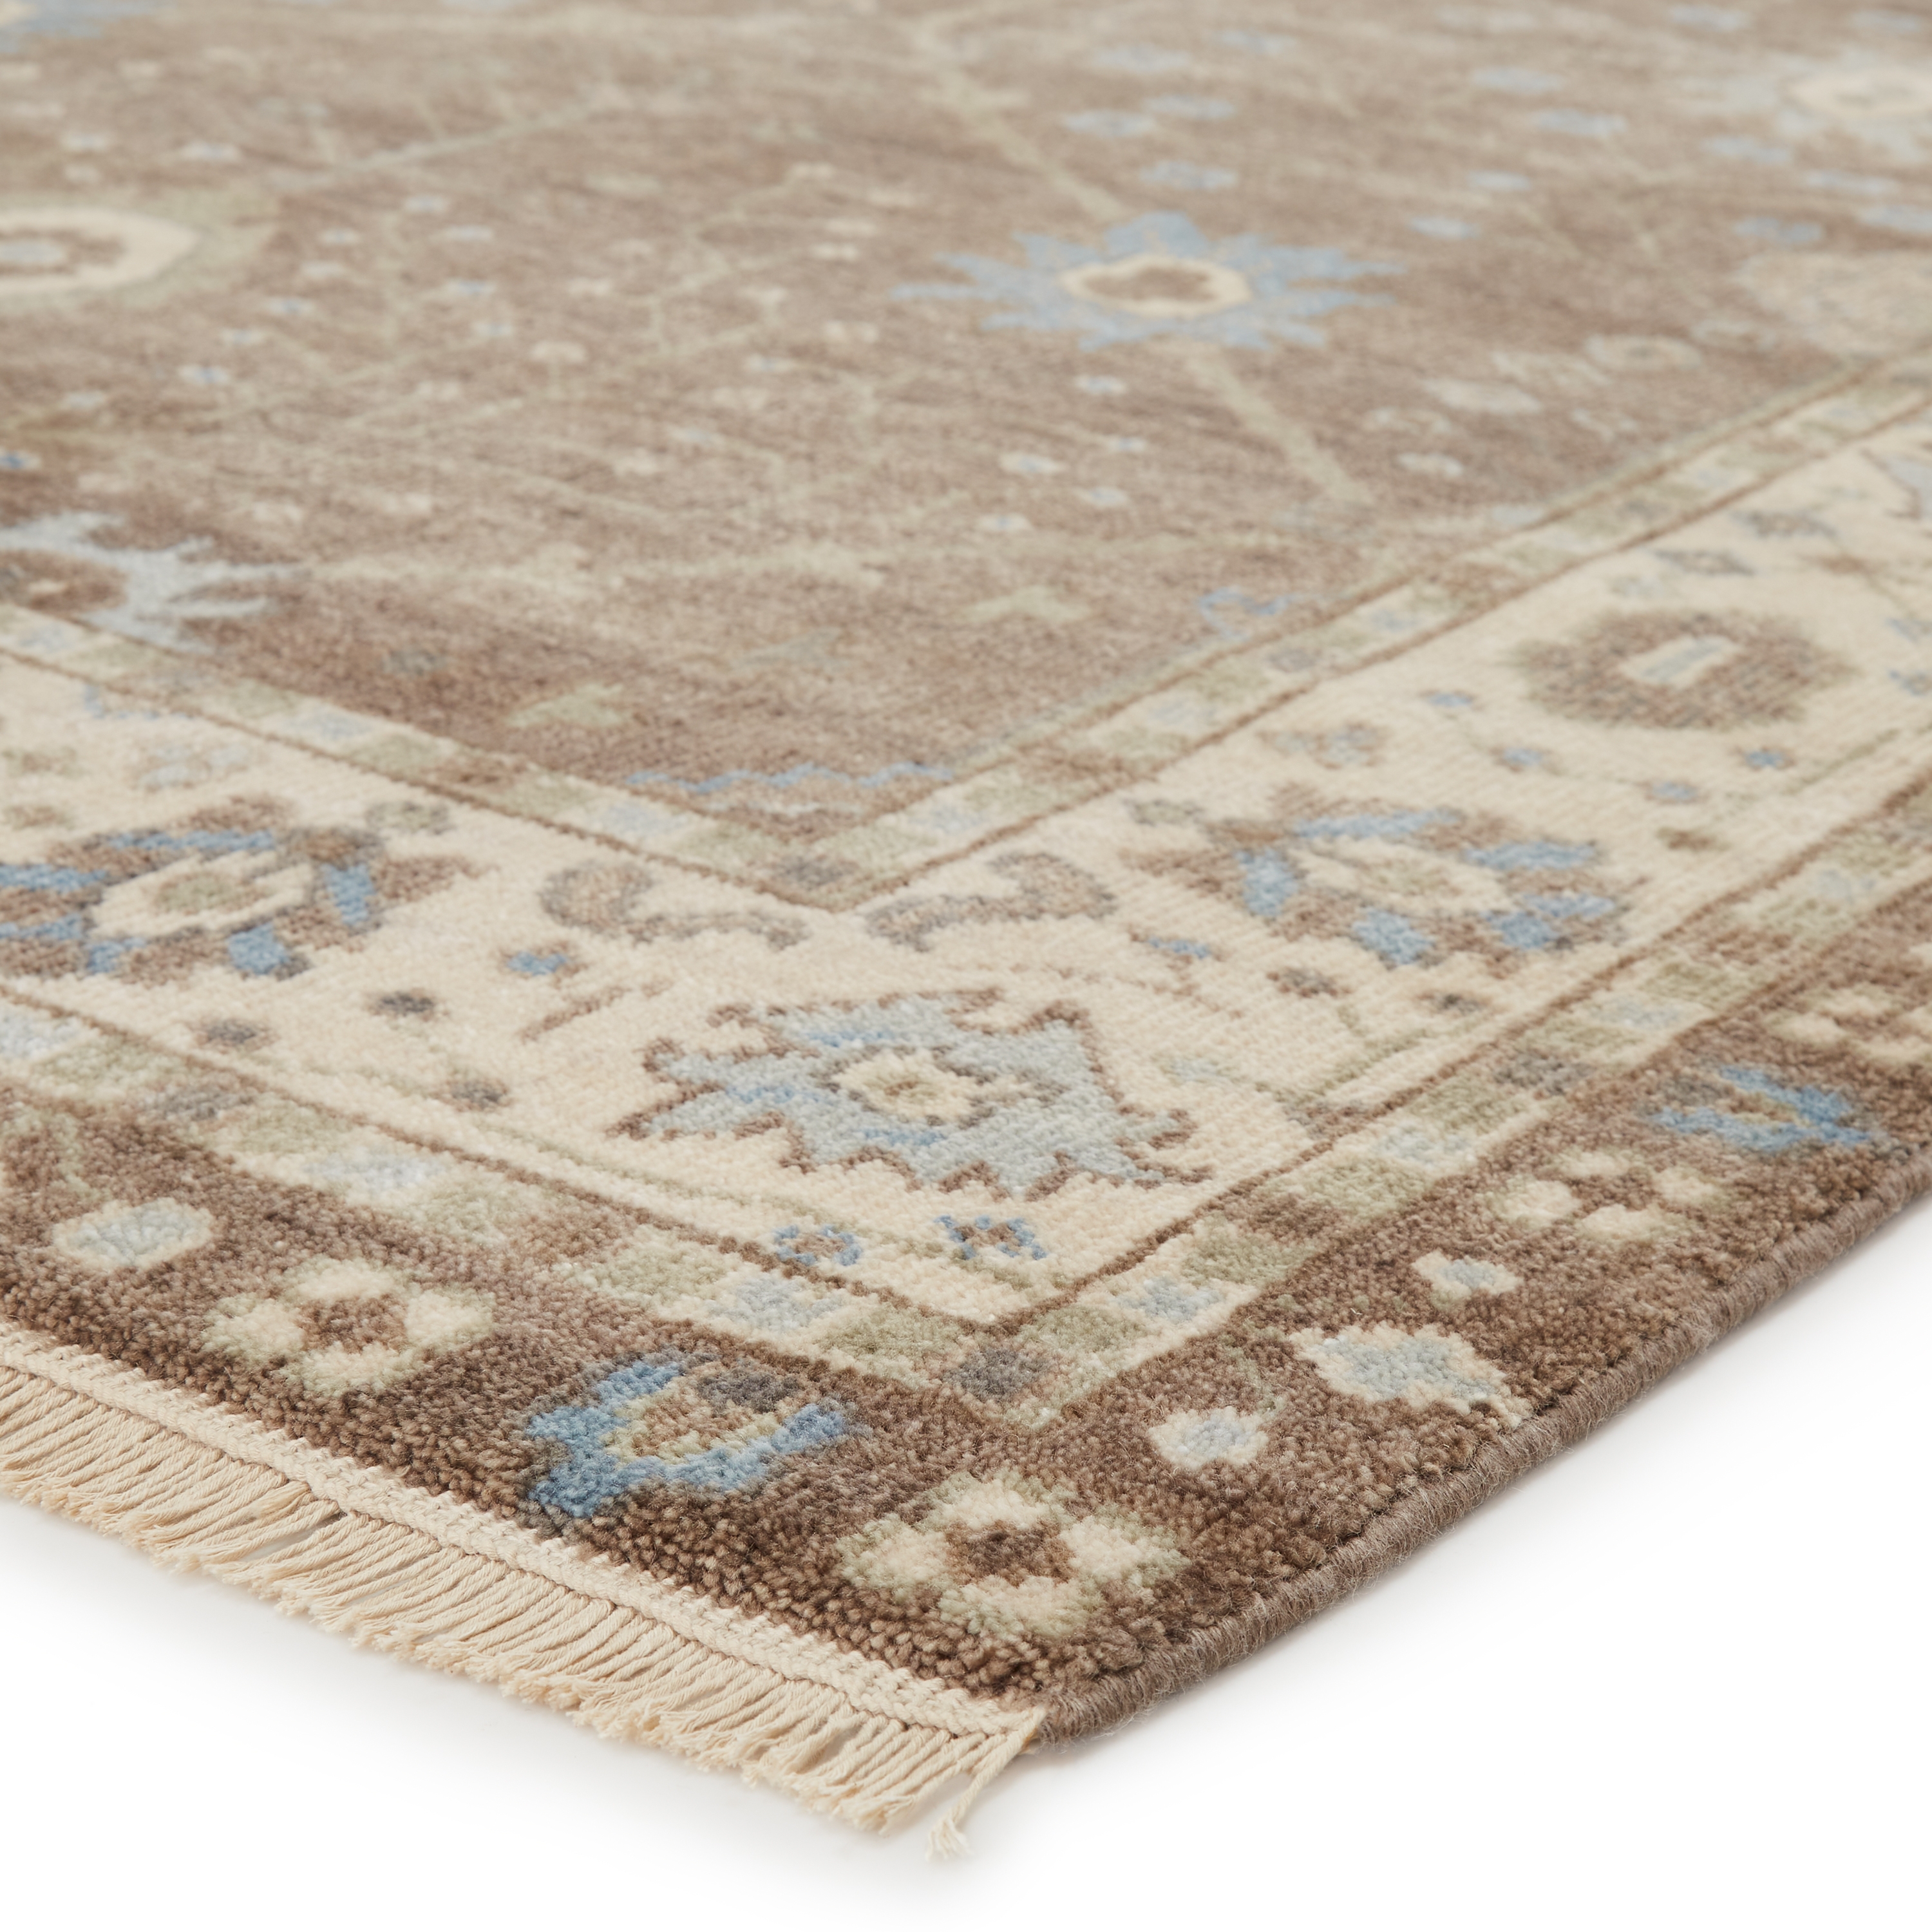 Princeton Hand-Knotted Floral Tan/ Light Blue Area Rug (5'X8') - Image 1